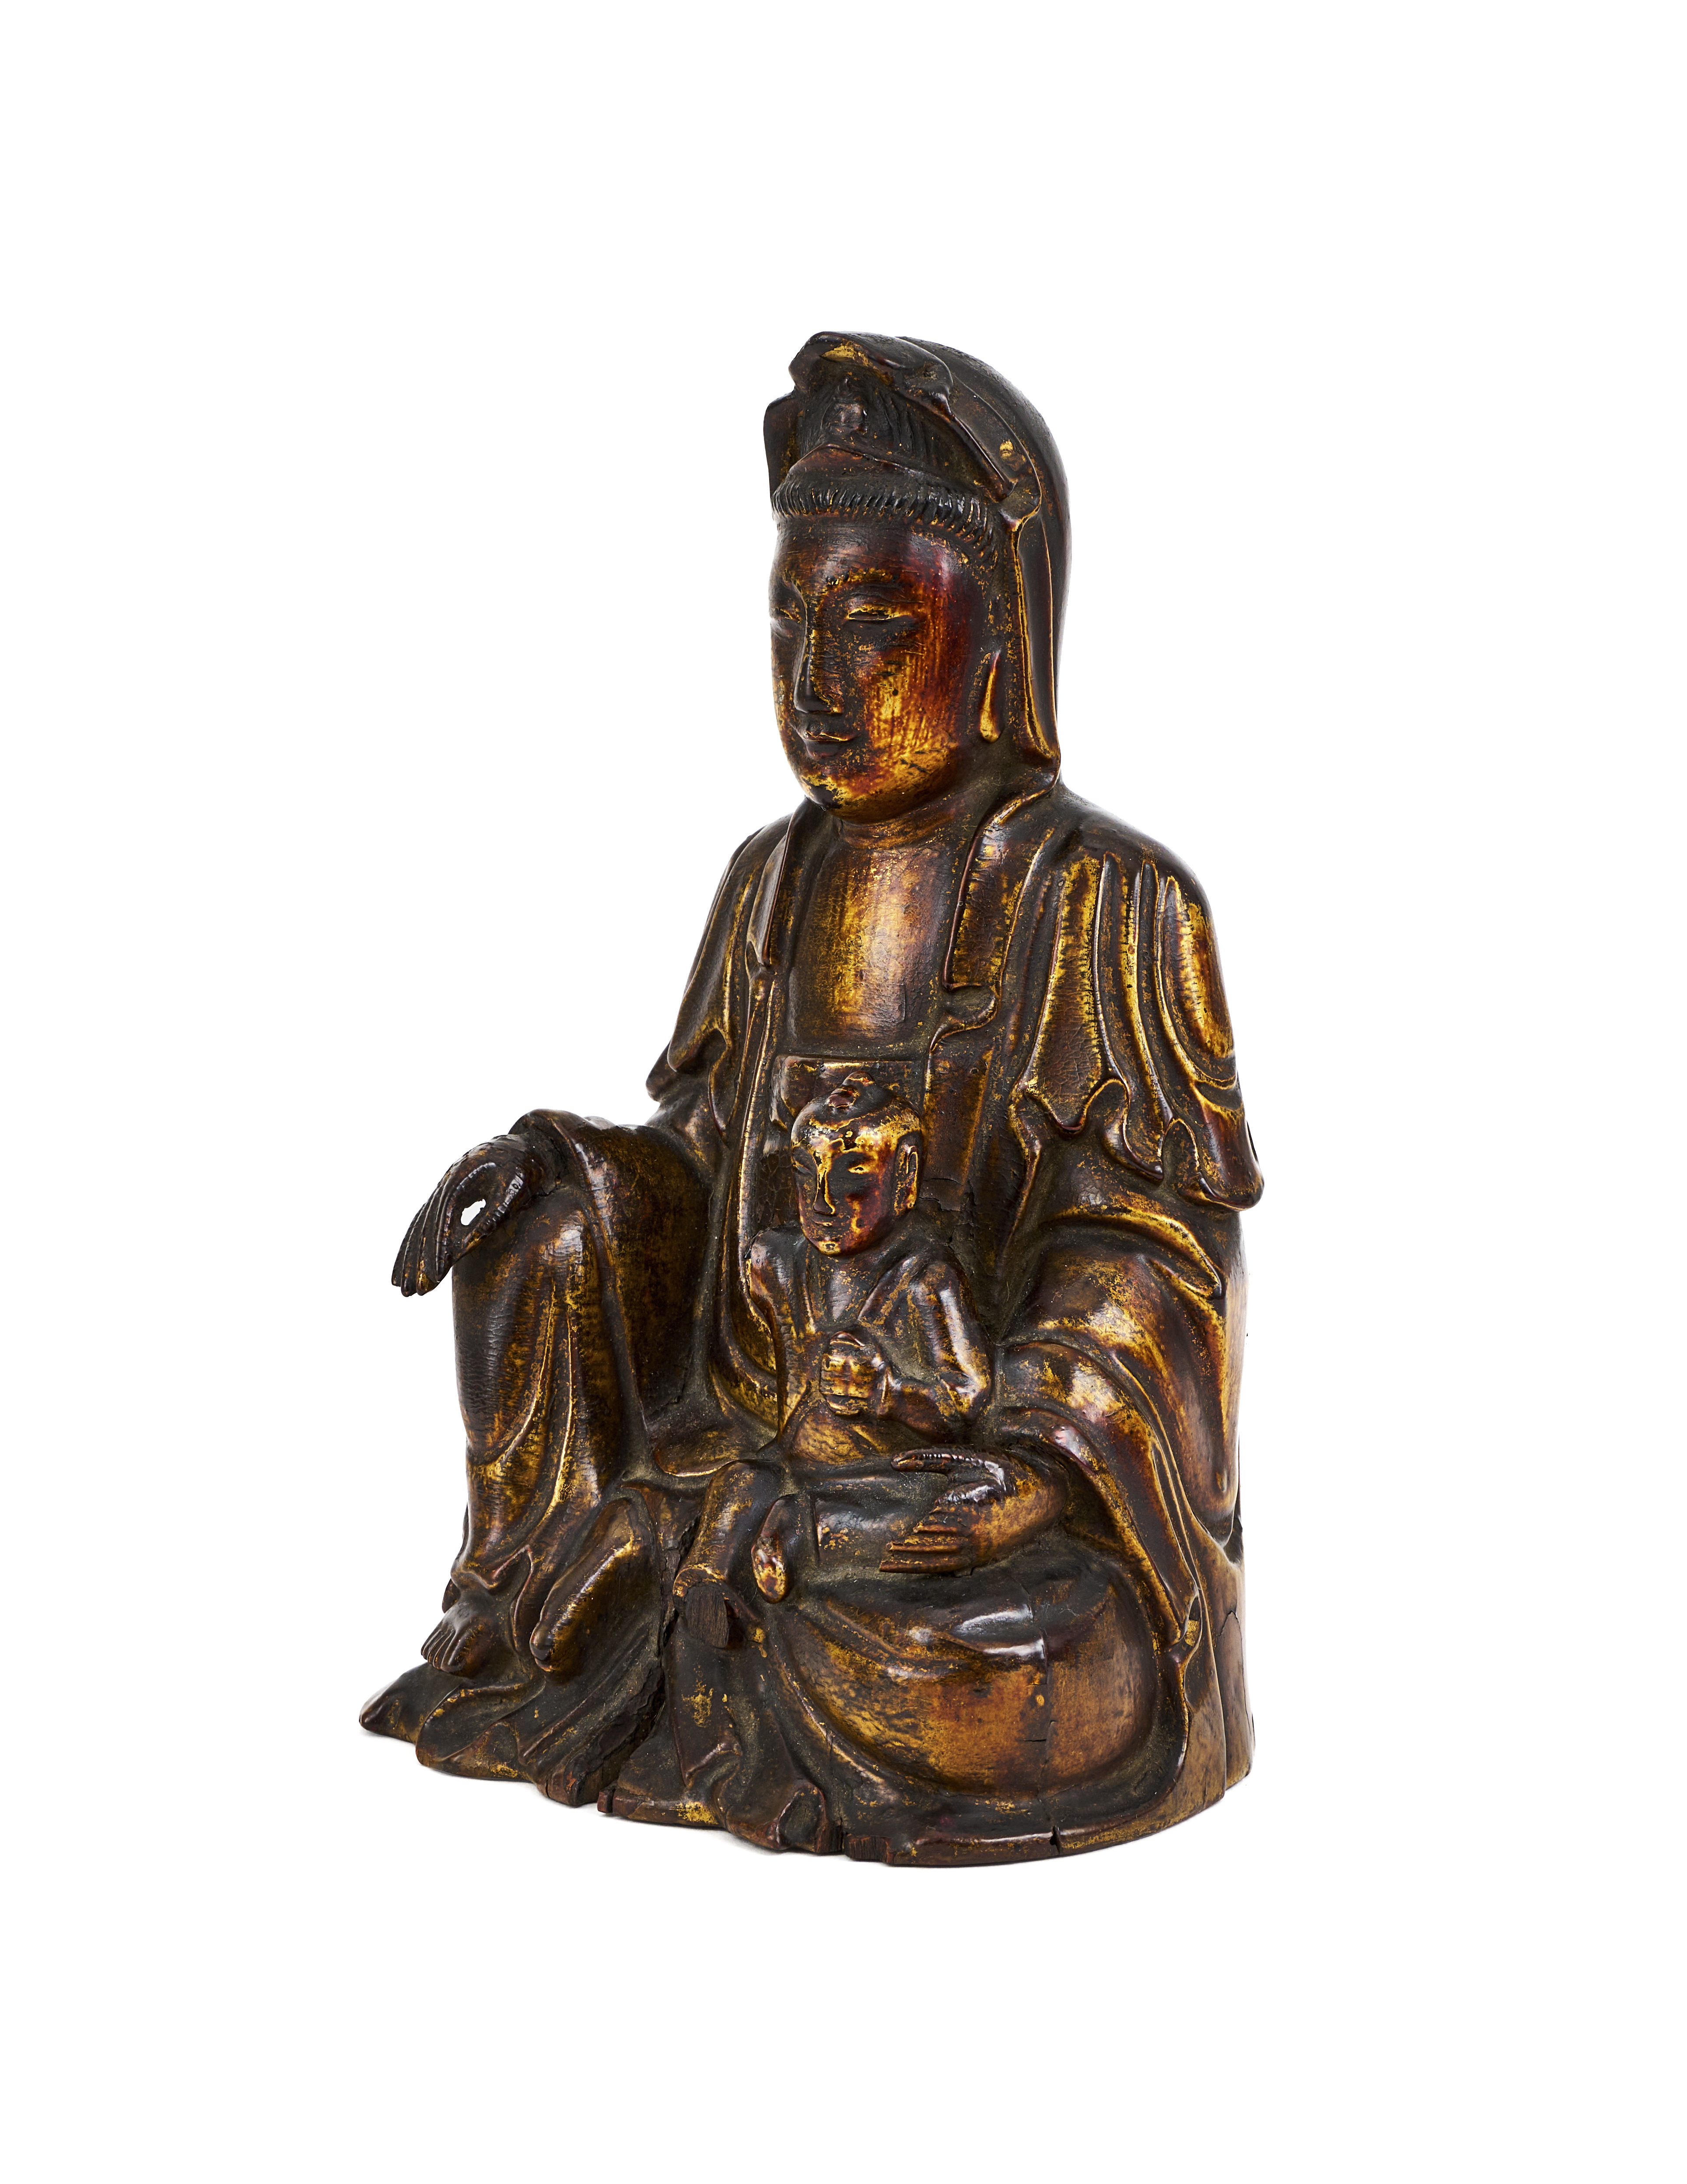 A GILT WOOD SEATED GUANYIN, QING DYNASTY (1644-1911) - Image 2 of 4